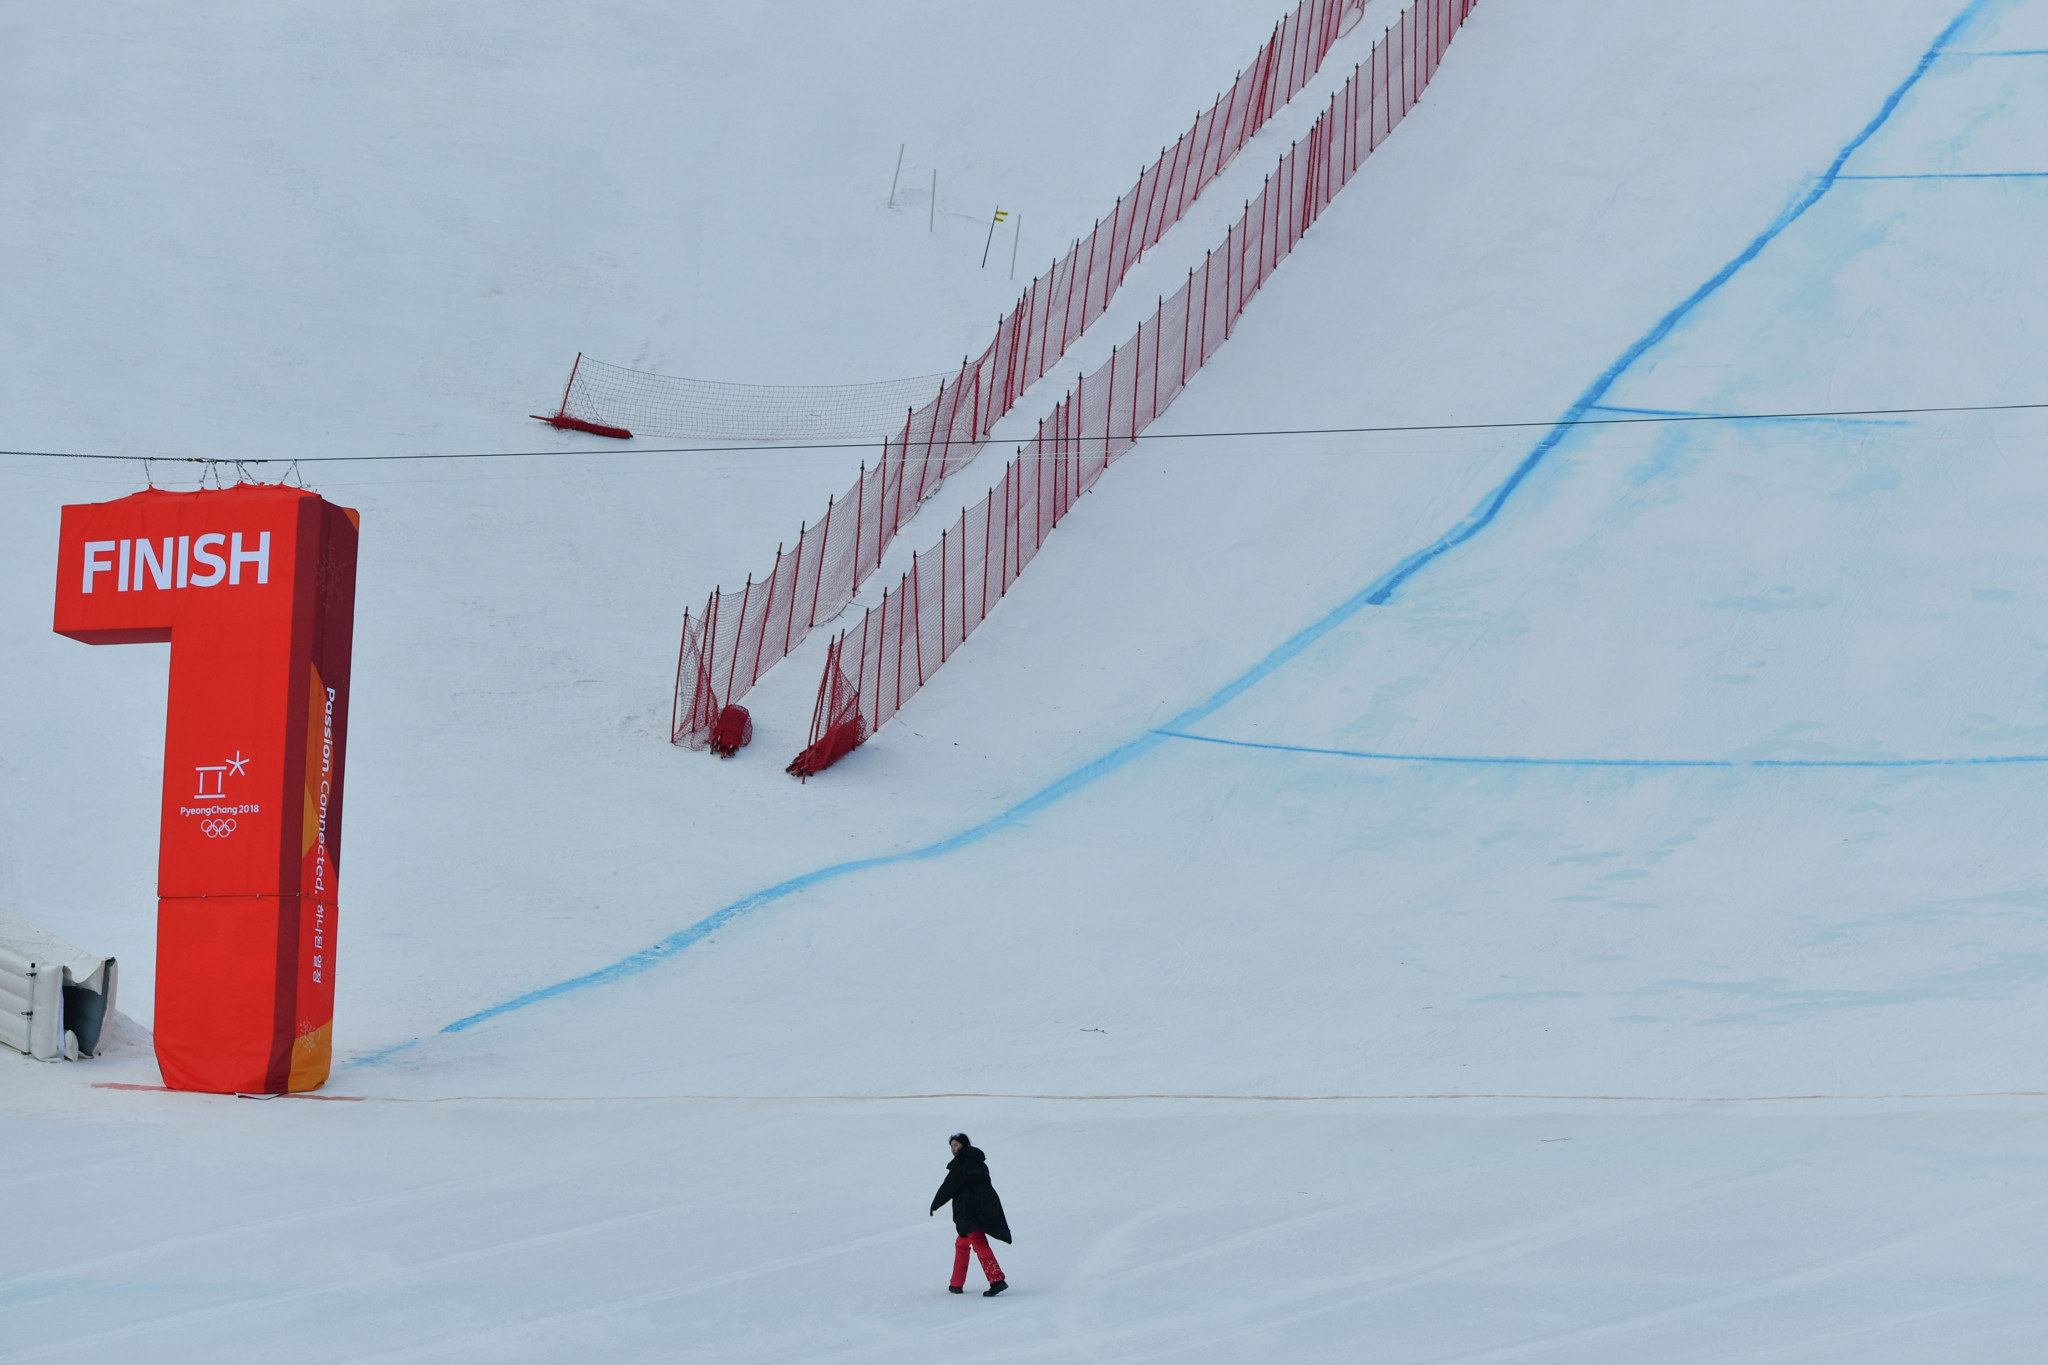 Strong winds force postponement of men's downhill at Pyeongchang 2018